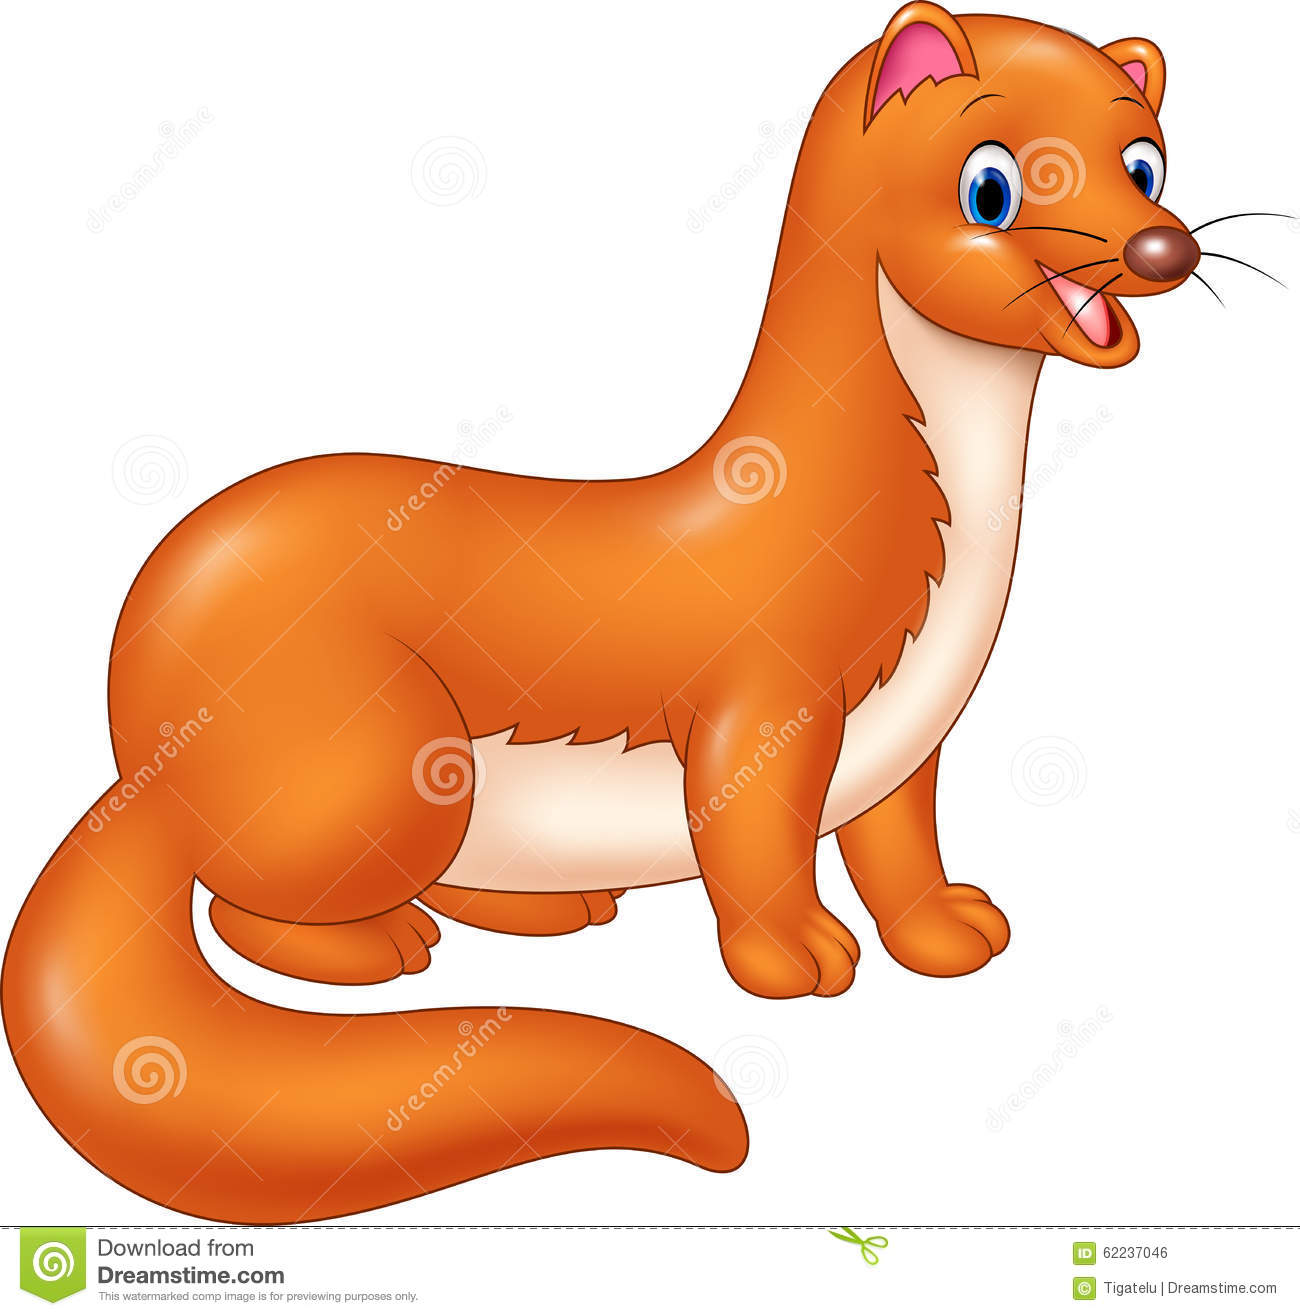 Weasel clipart #3, Download drawings